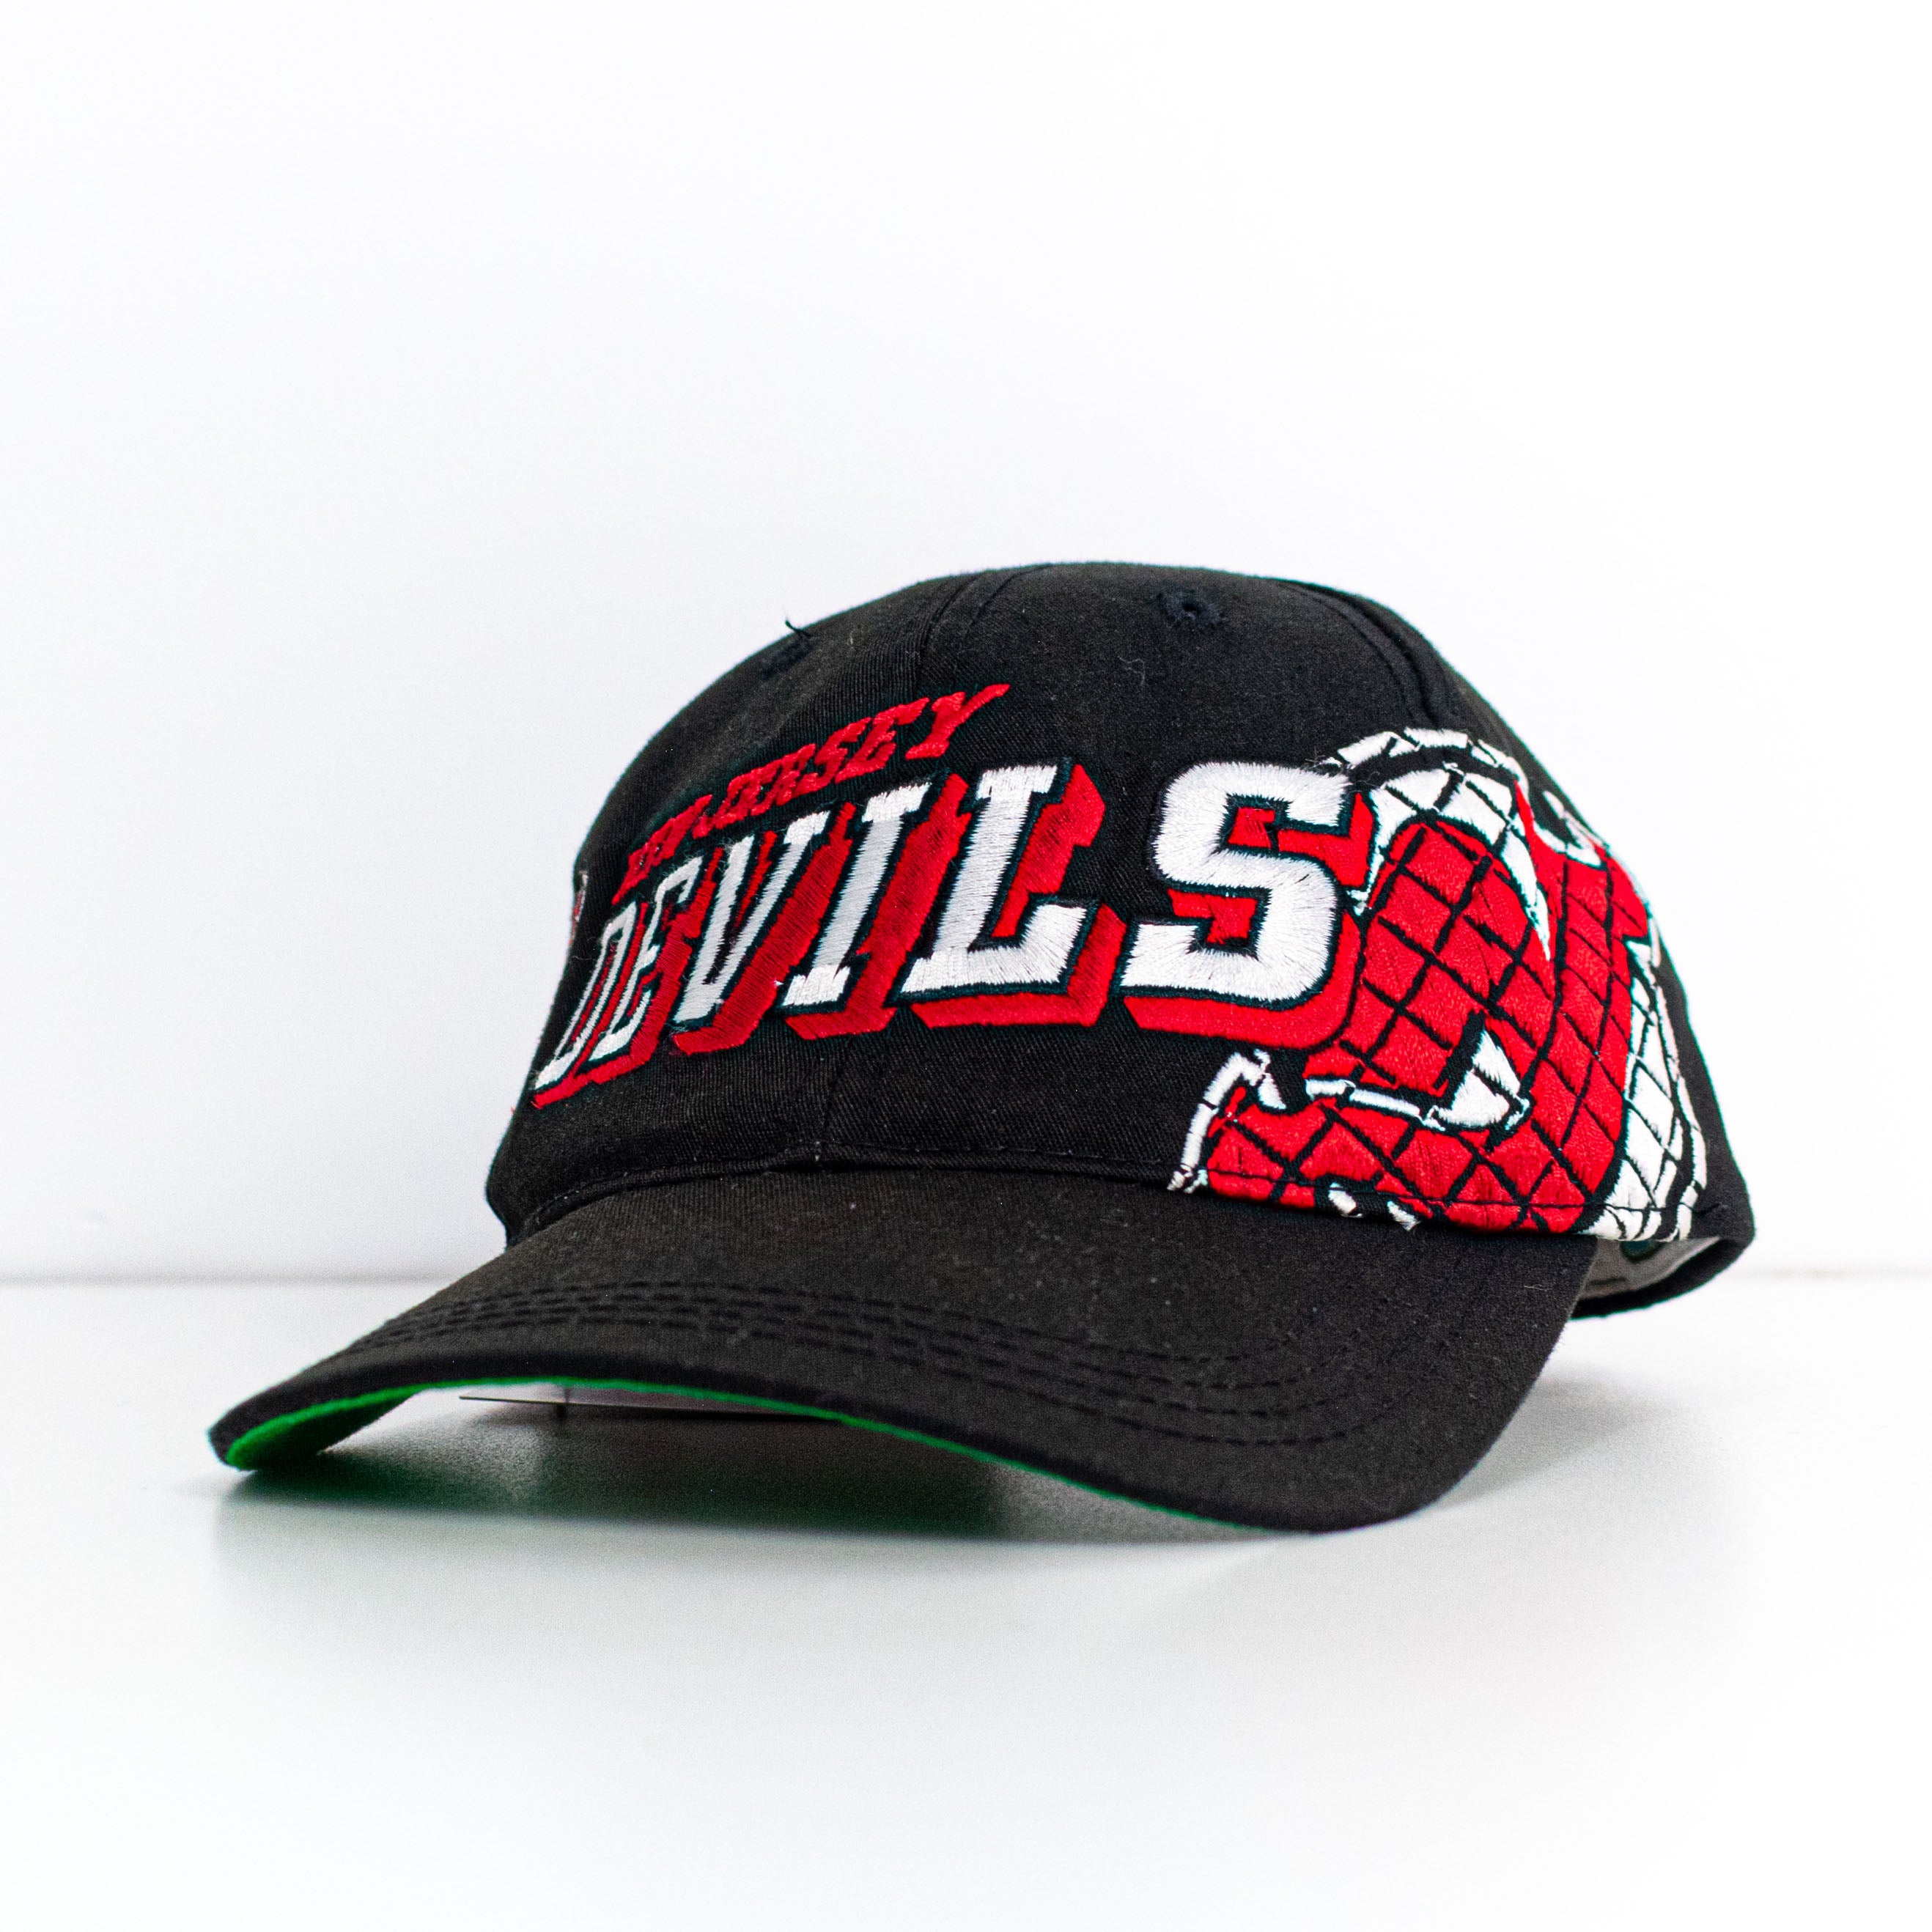 adidas, Accessories, New Jersey Devils Fitted Cap